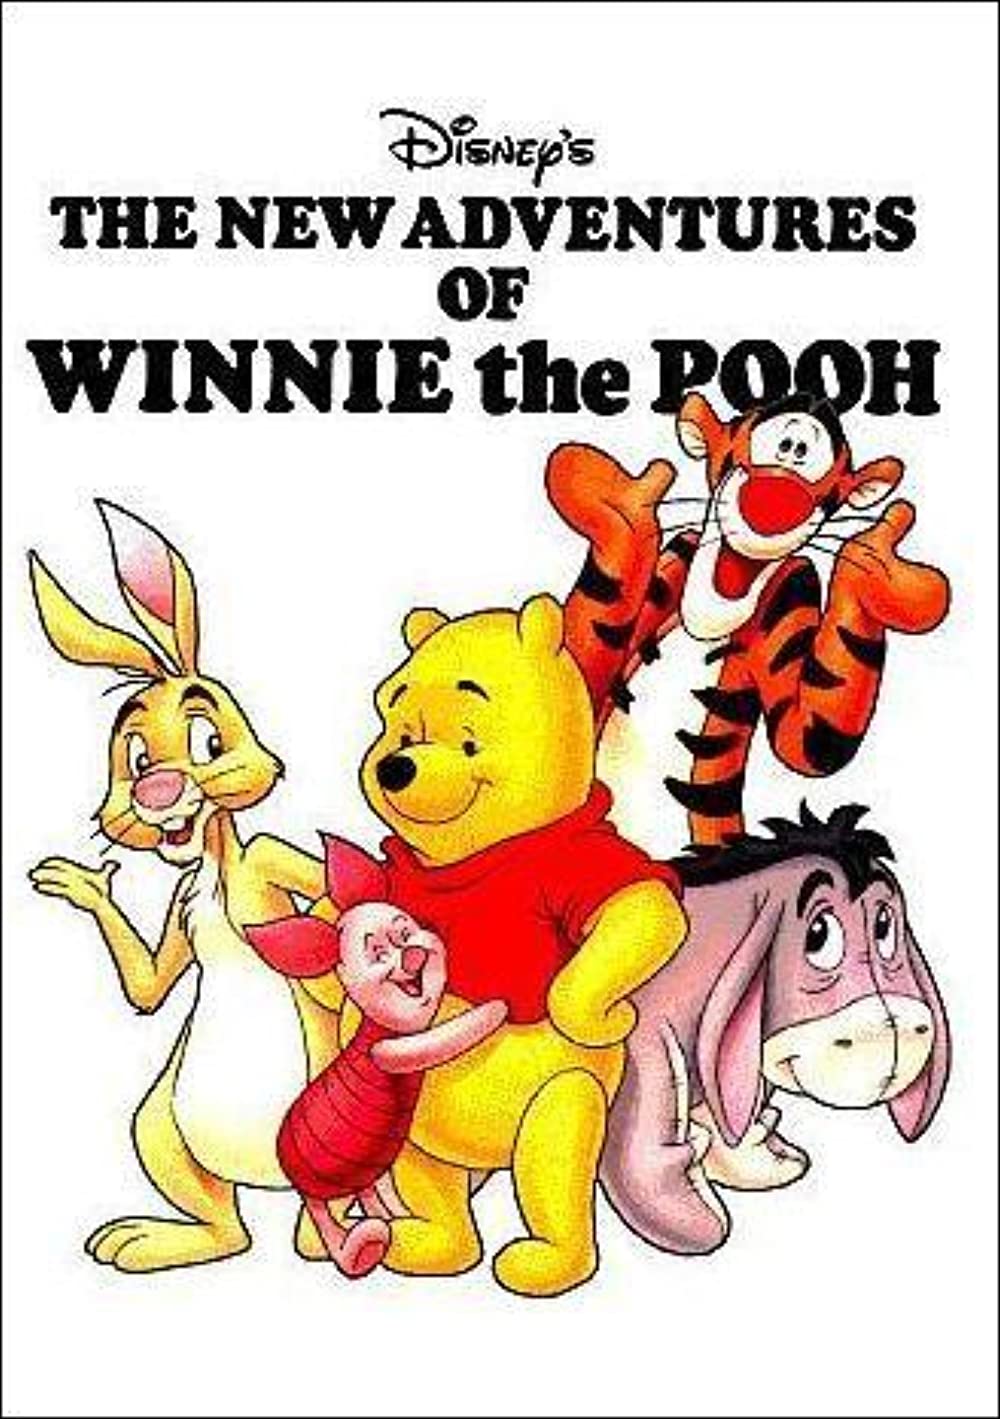 90s cartoon show The New Adventures of Winnie The Pooh